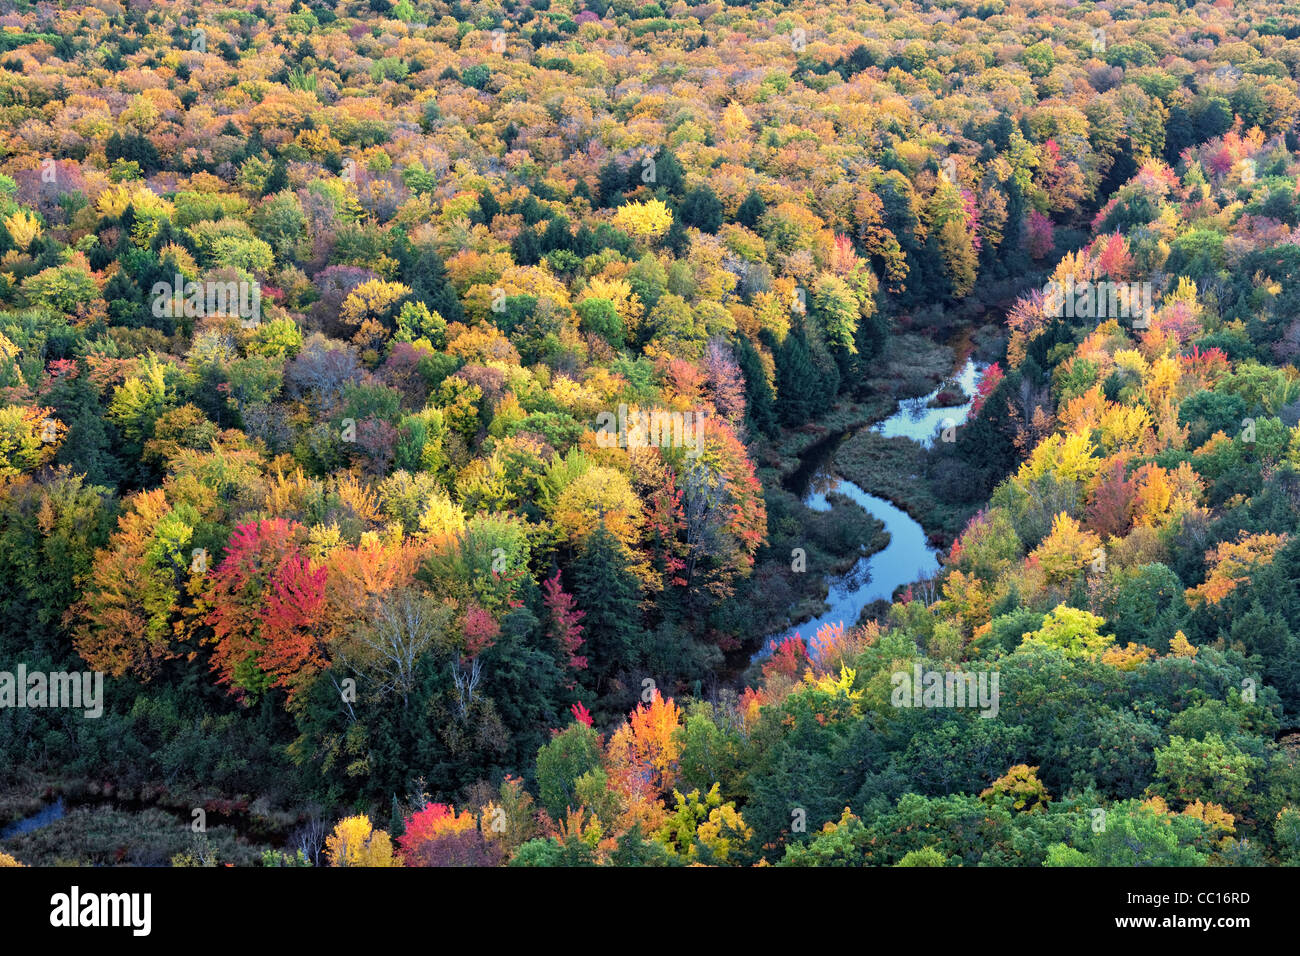 The Carp River and the autumn canopy of Ottawa National Forest and Porcupine Mountains State Park in Michigan's Upper Peninsula. Stock Photo